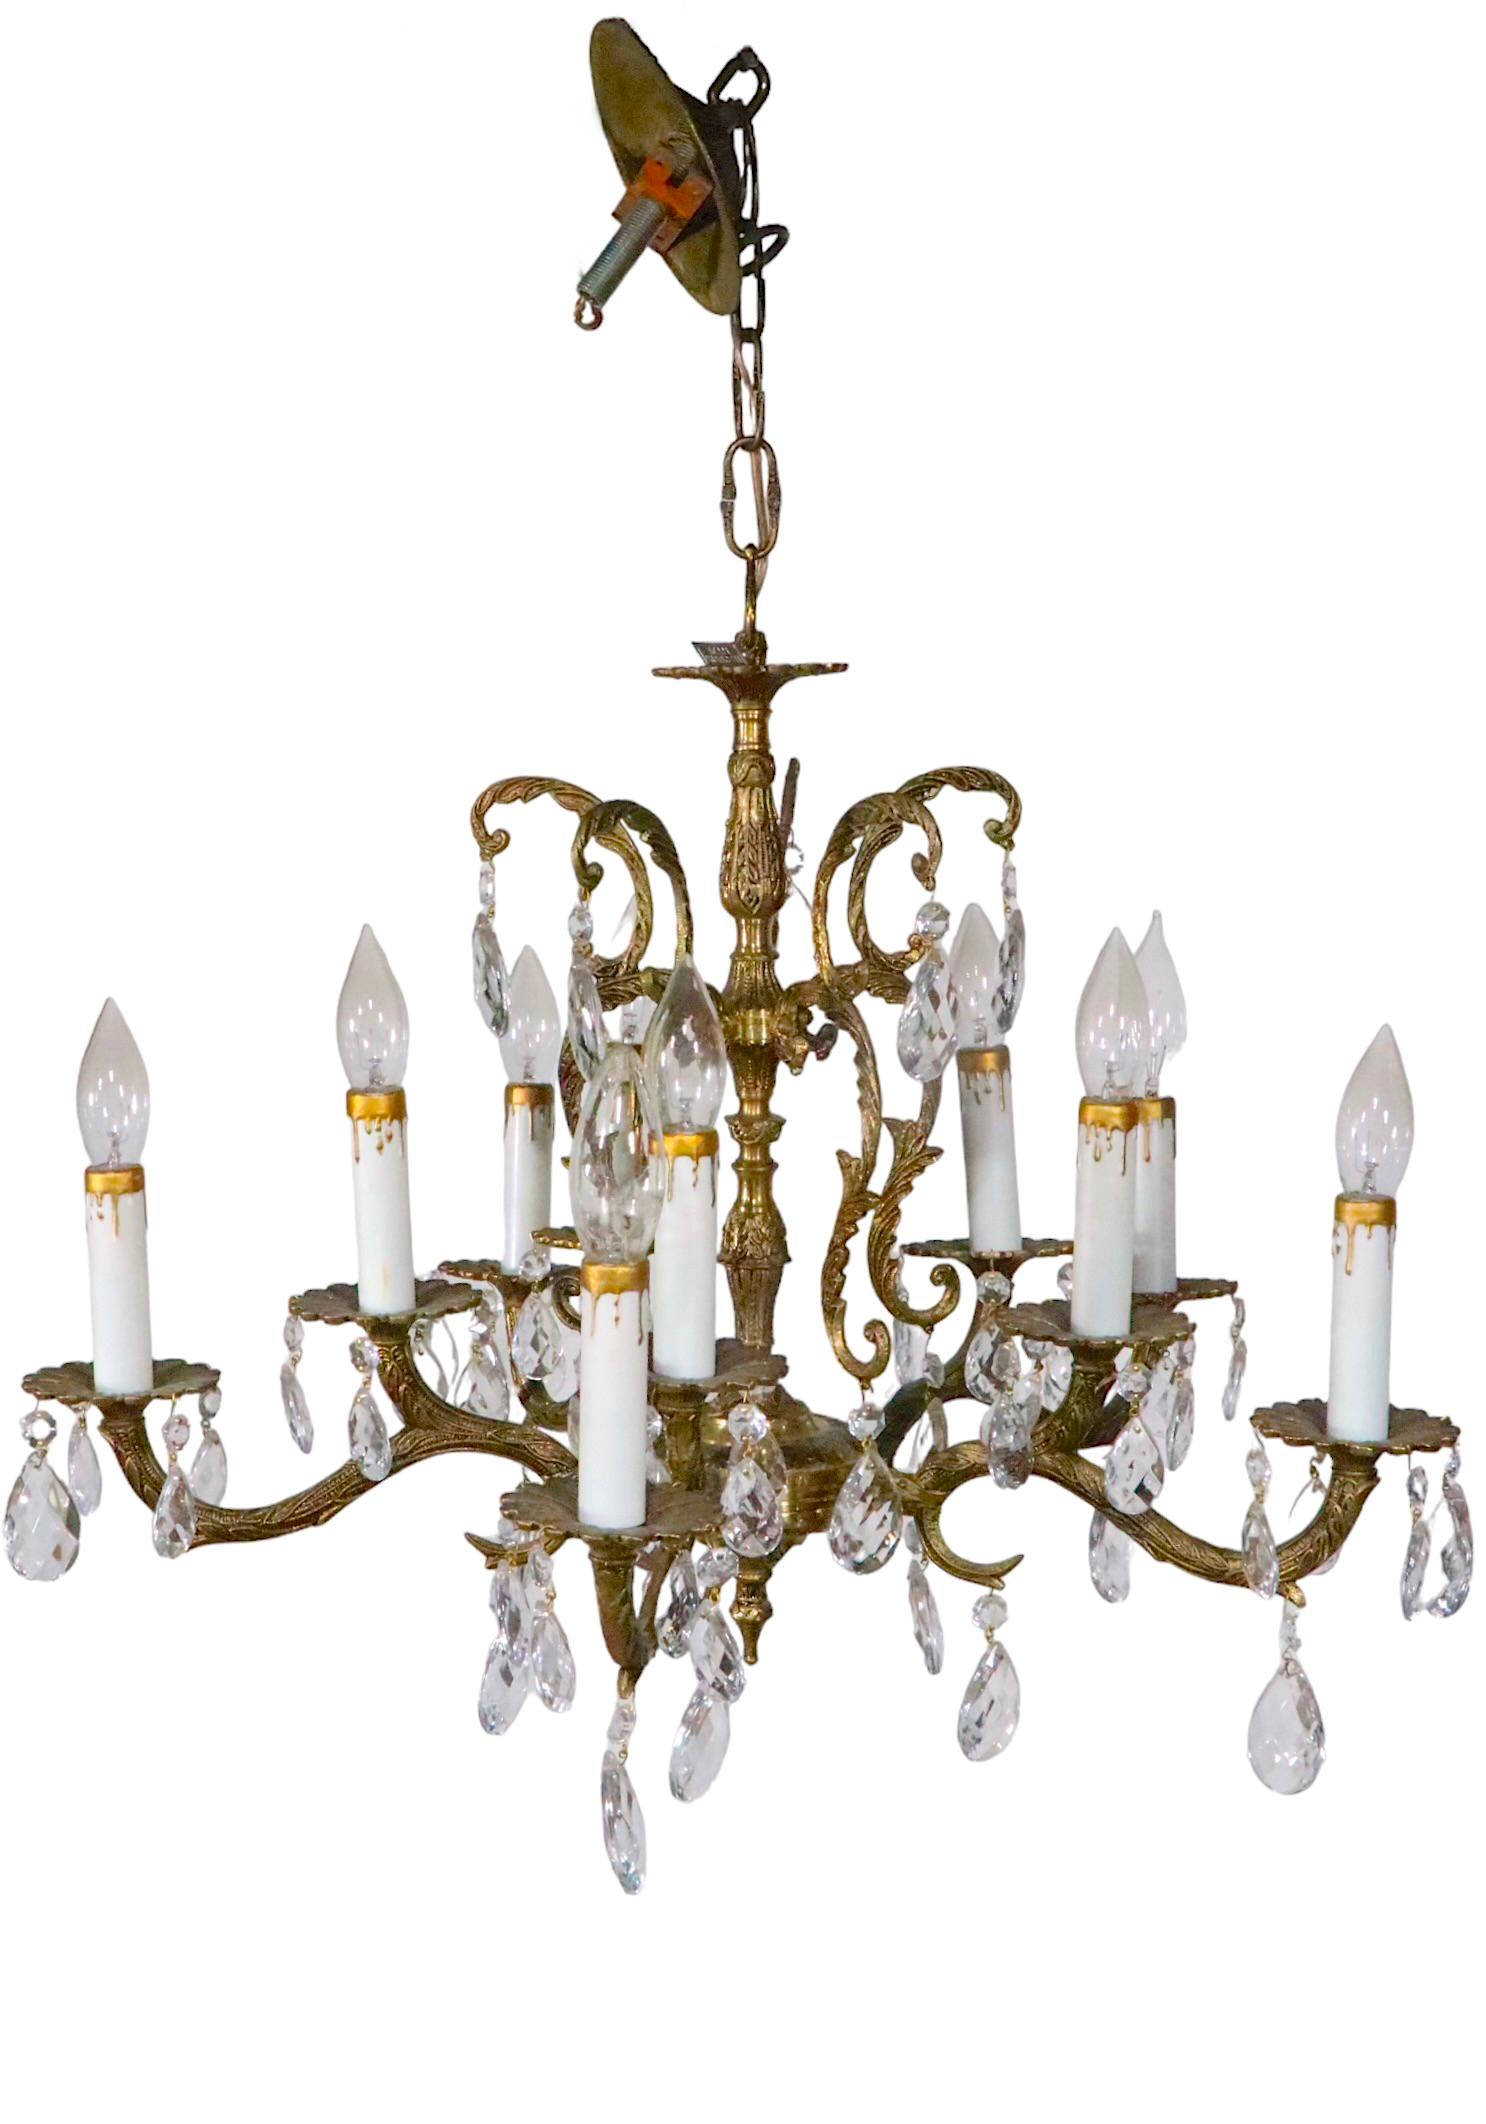 Spanish Ornate Cast Brass and Crystal  10 Light Chandelier Made in Spain c 1950's For Sale